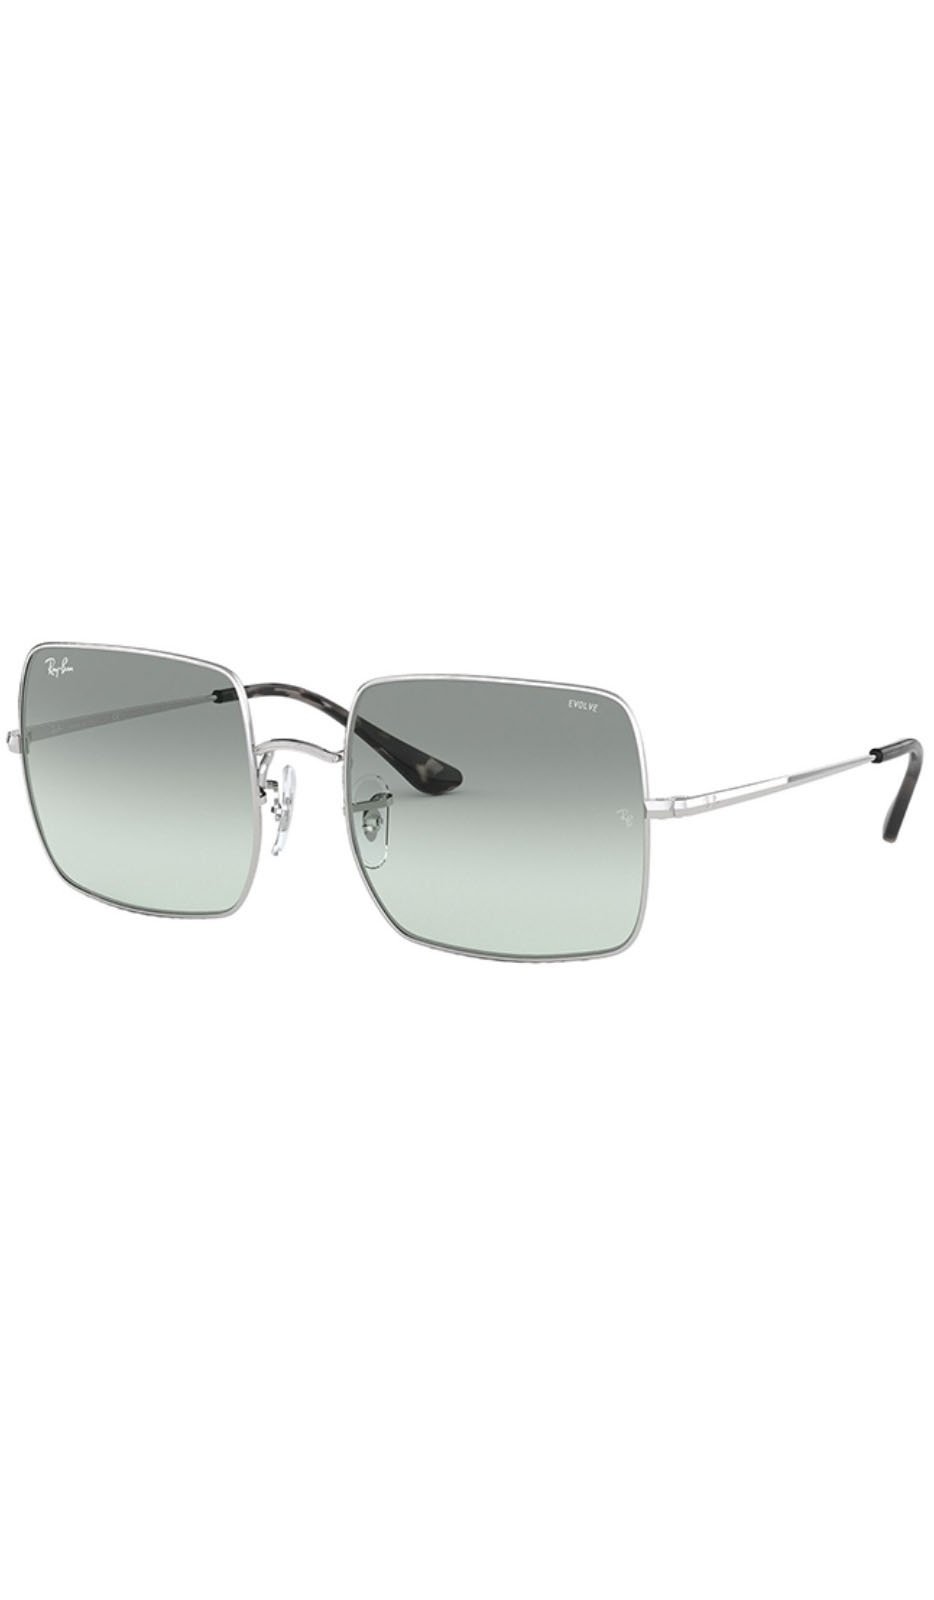 Ray-Ban Sunglasses - RB1971-9149/AD-54 - LifeStyle Collection